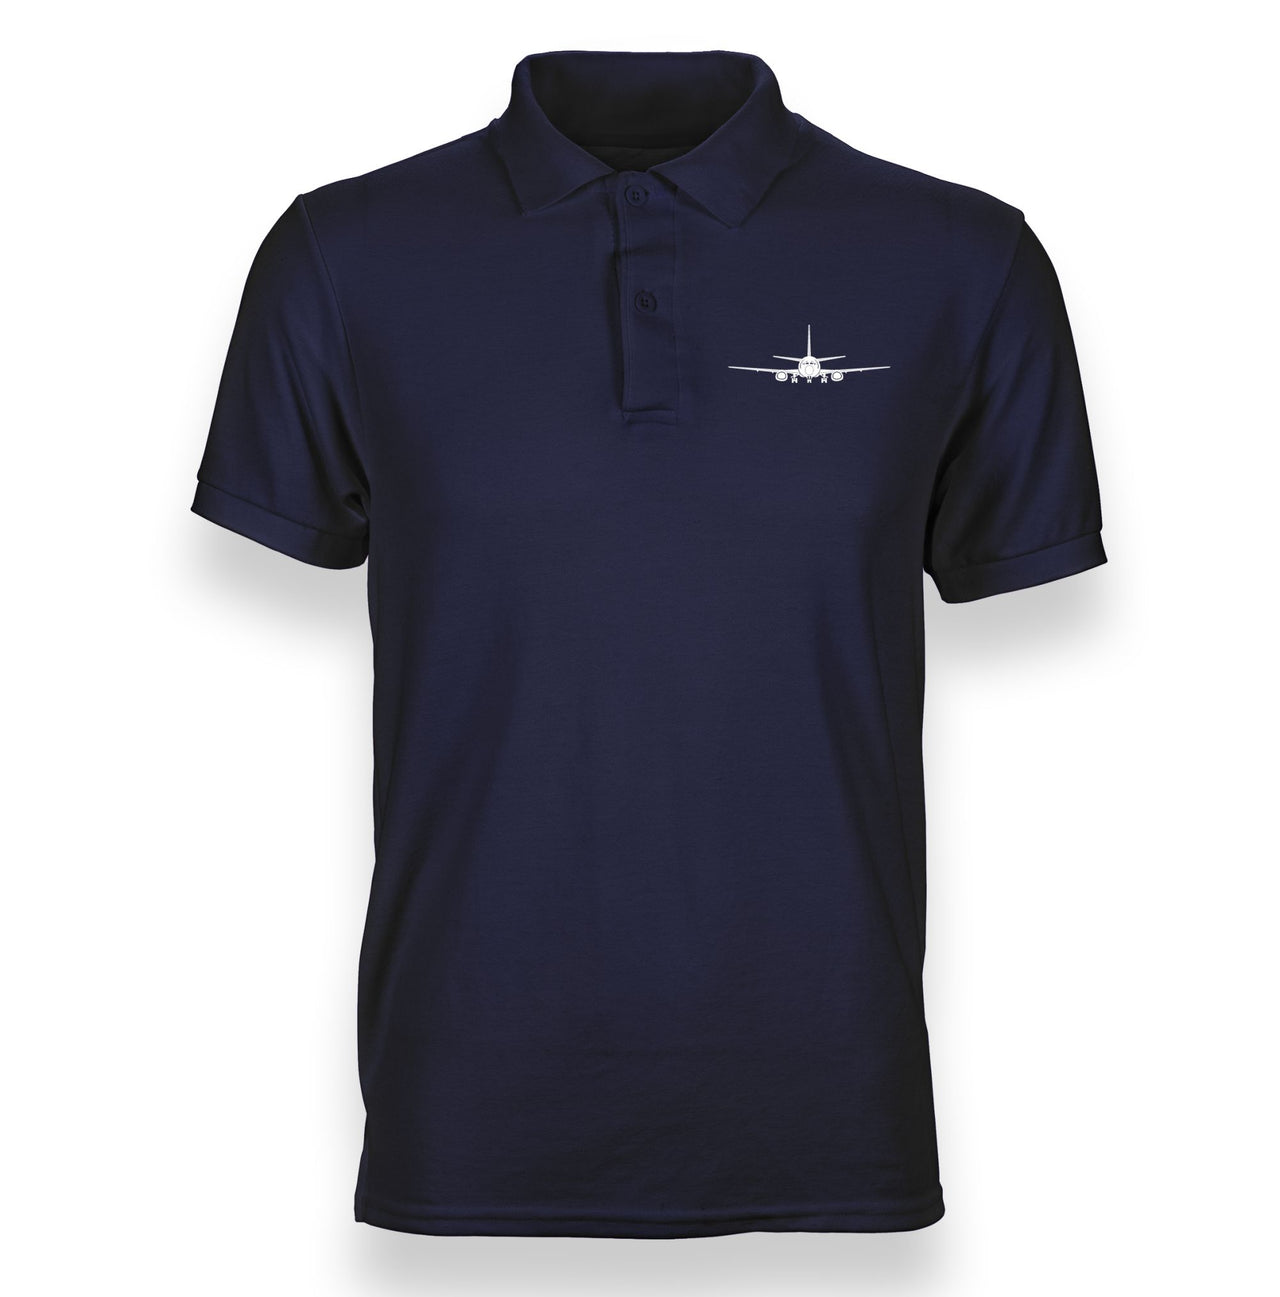 Boeing 737 Silhouette Designed "WOMEN" Polo T-Shirts